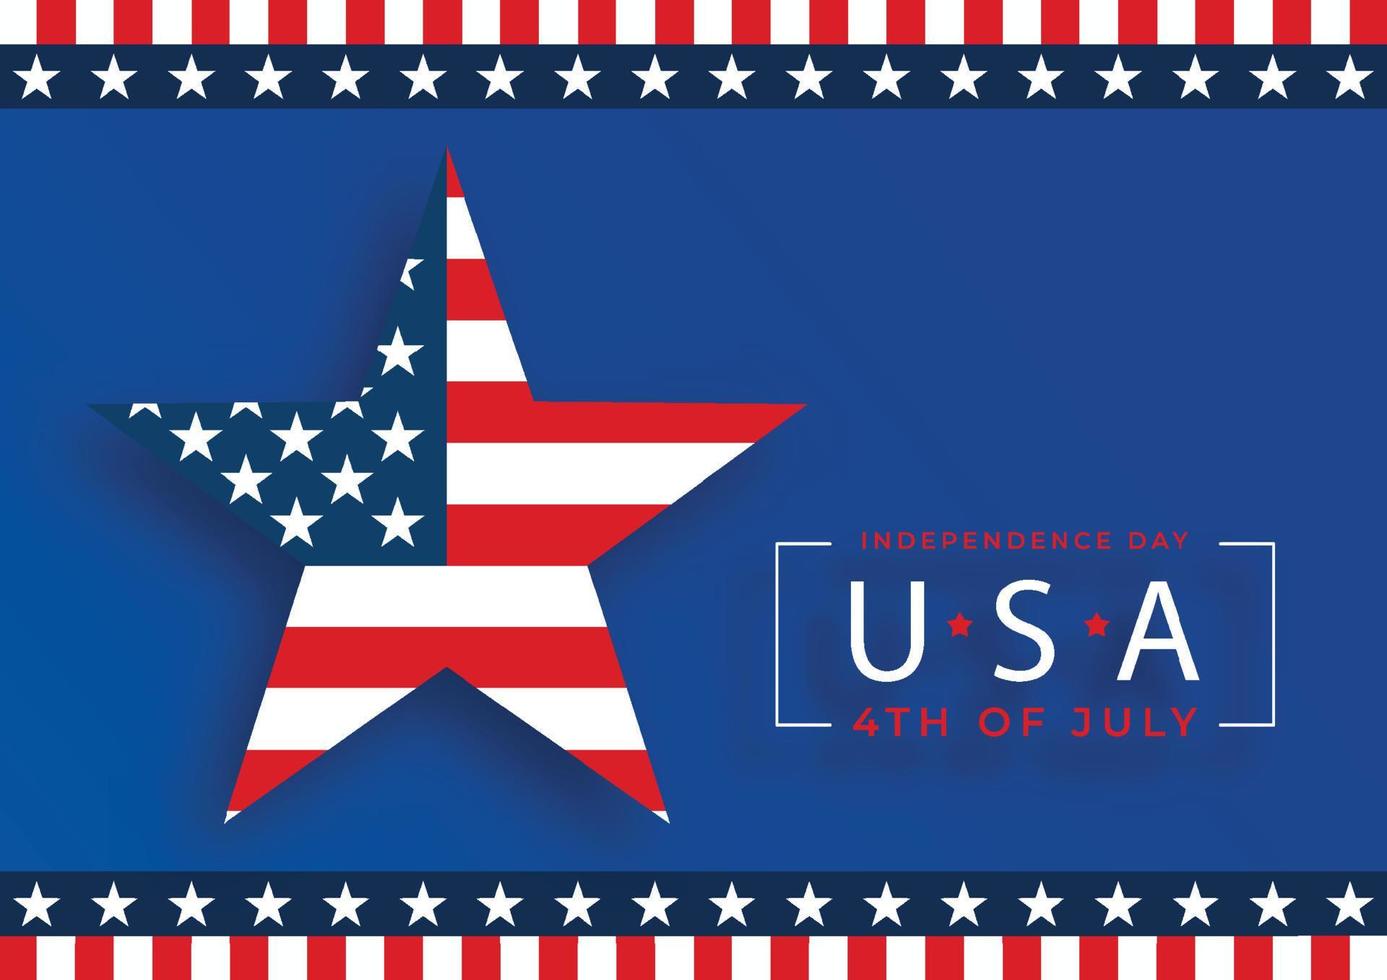 Happy Independence day of USA for festive national anniversary of USA, on July 4 vector